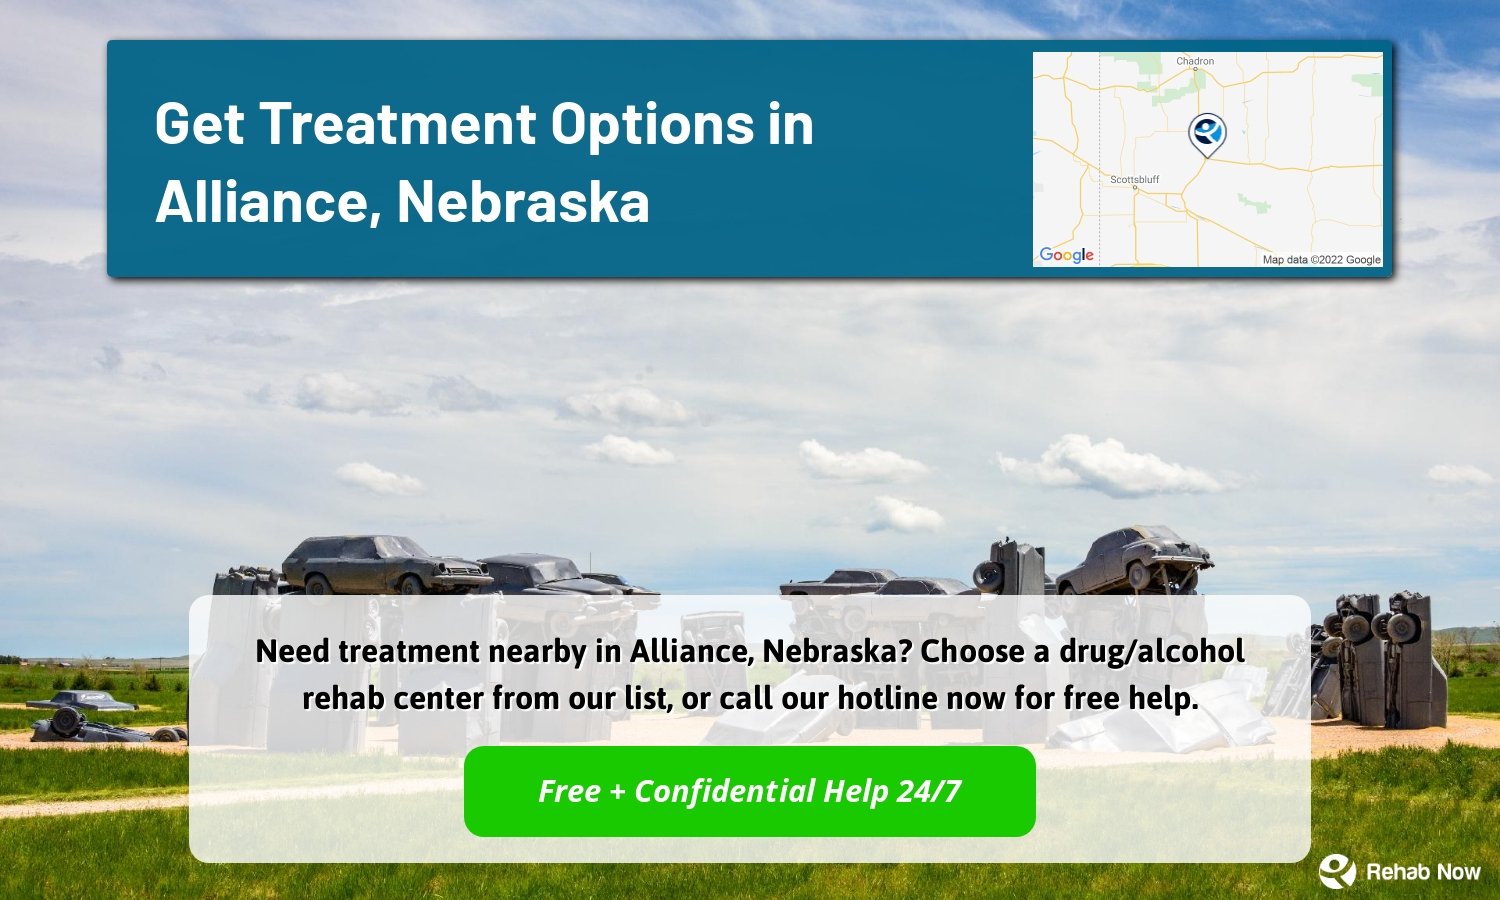 Need treatment nearby in Alliance, Nebraska? Choose a drug/alcohol rehab center from our list, or call our hotline now for free help.